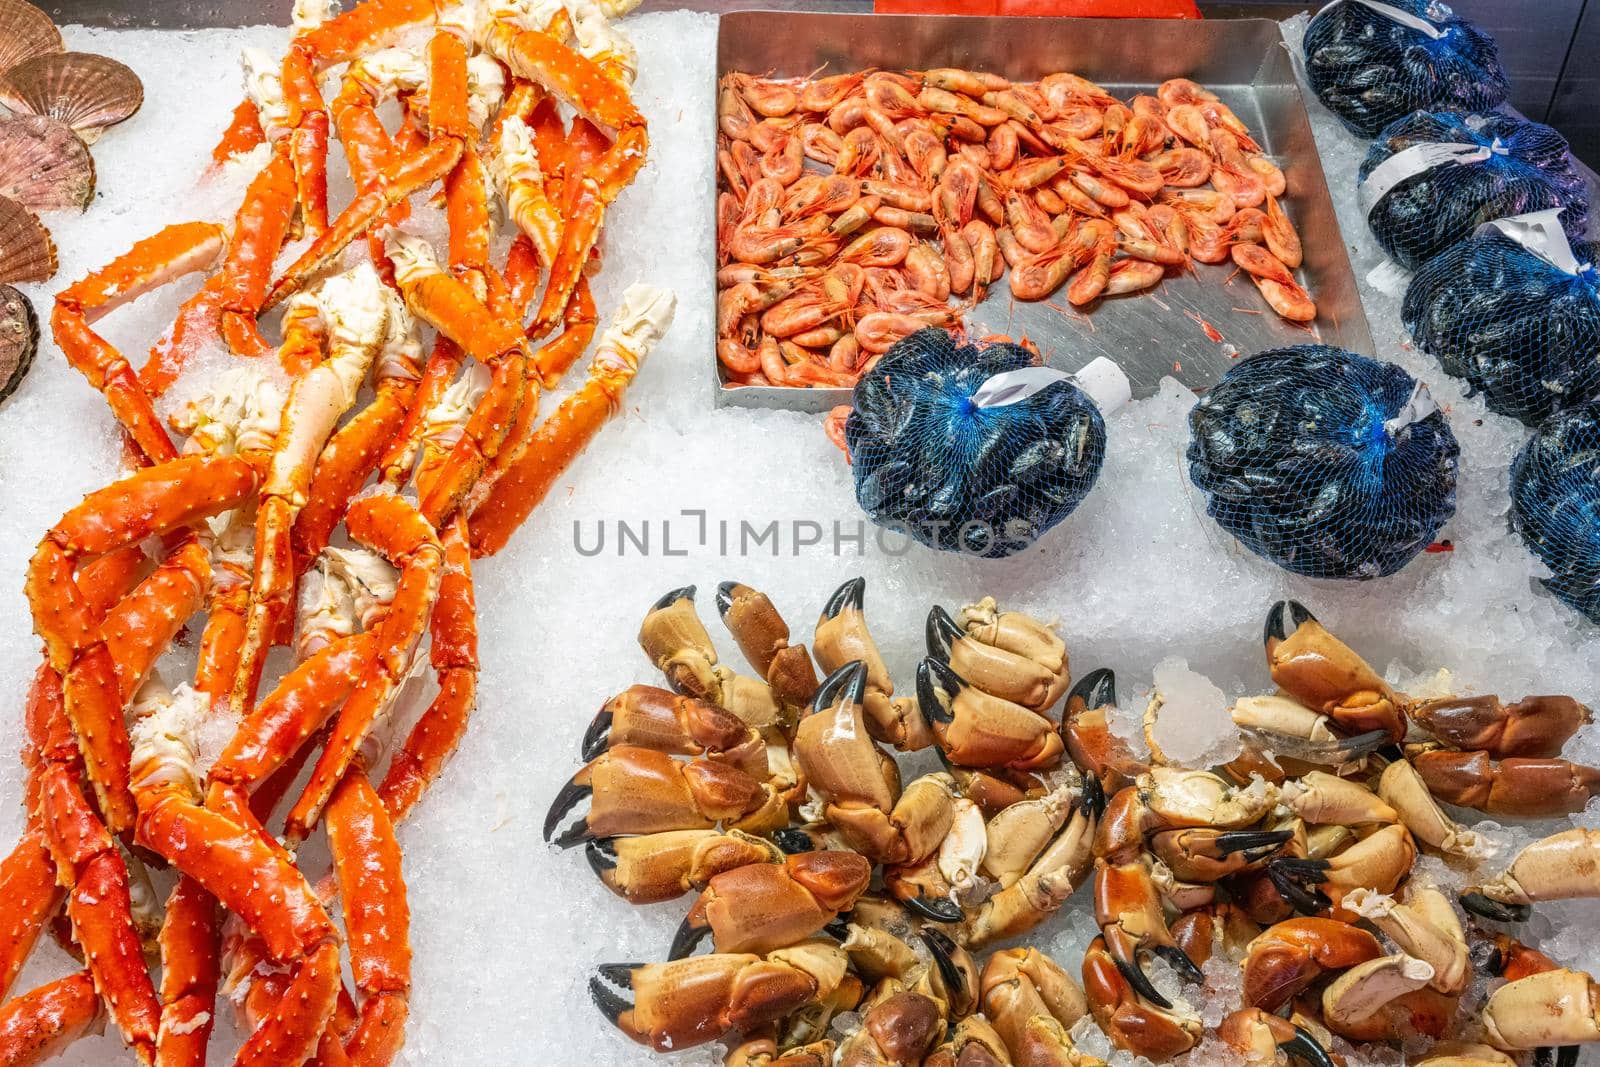 Prawns, clams and crabs for sale at a market in Bergen, Norway